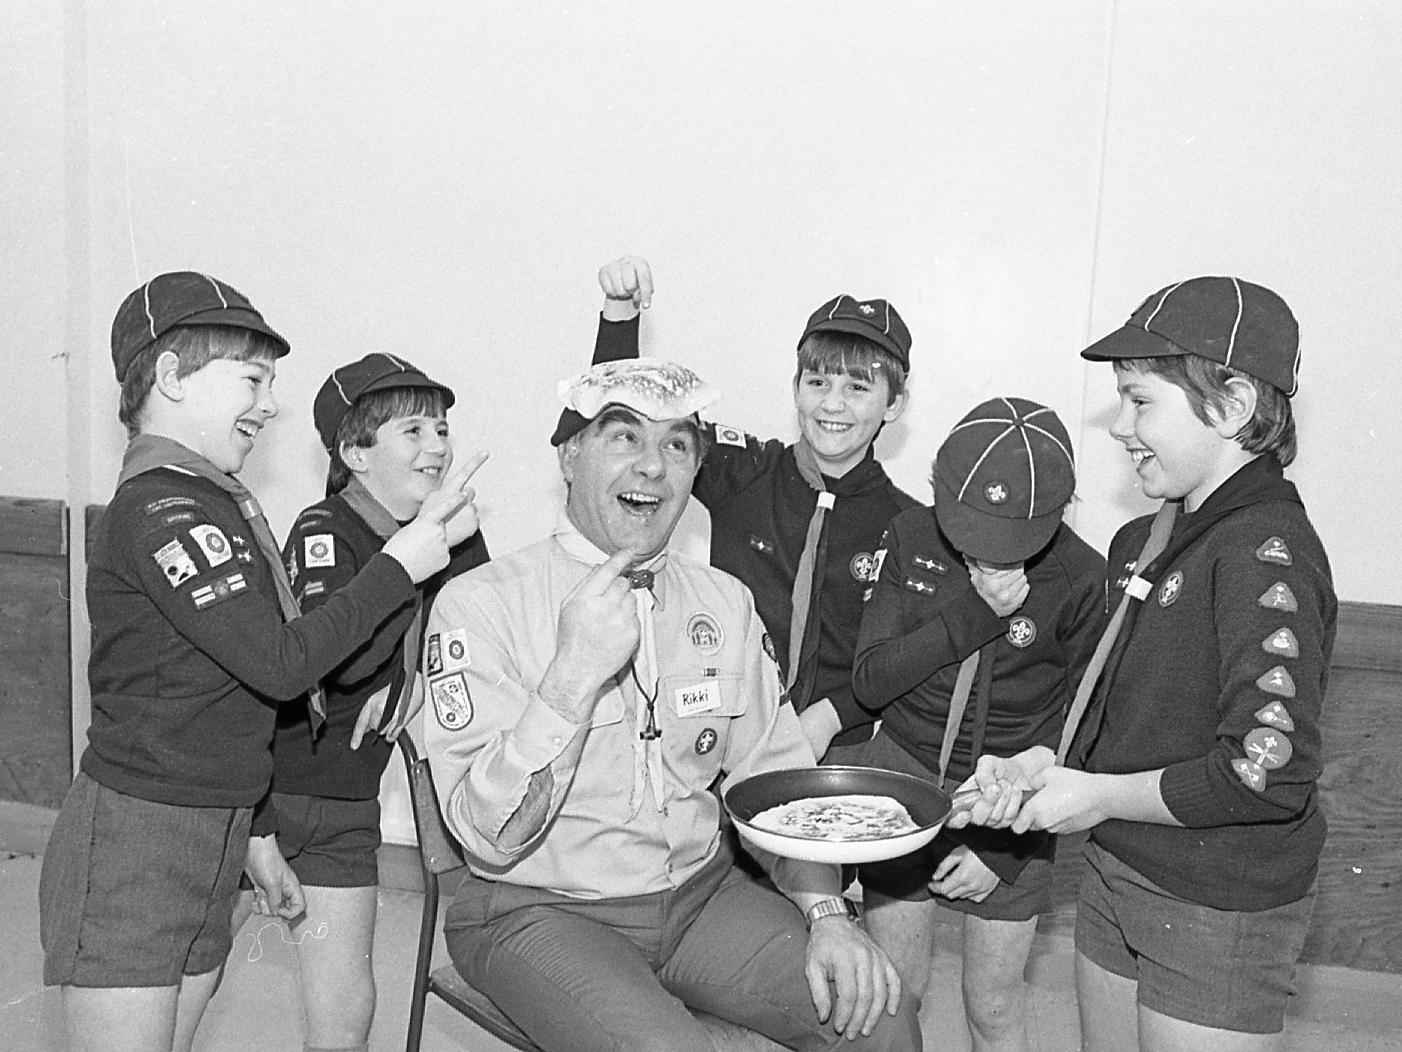 Flipping heck! To cap it all, South Ribble's Club chief, Roger Farrington, wasn't prepared for a top award when he visited the 9th Penwortham St Leonard's Spitfire Cub Pack, who were preparing for Pancake Day. Pictured are Sixers Stuart Hunter, Noel Ackerman, Andrew Smith, Steven Harry and Andrew Crompton, having a laugh at Mr Farrington's expense